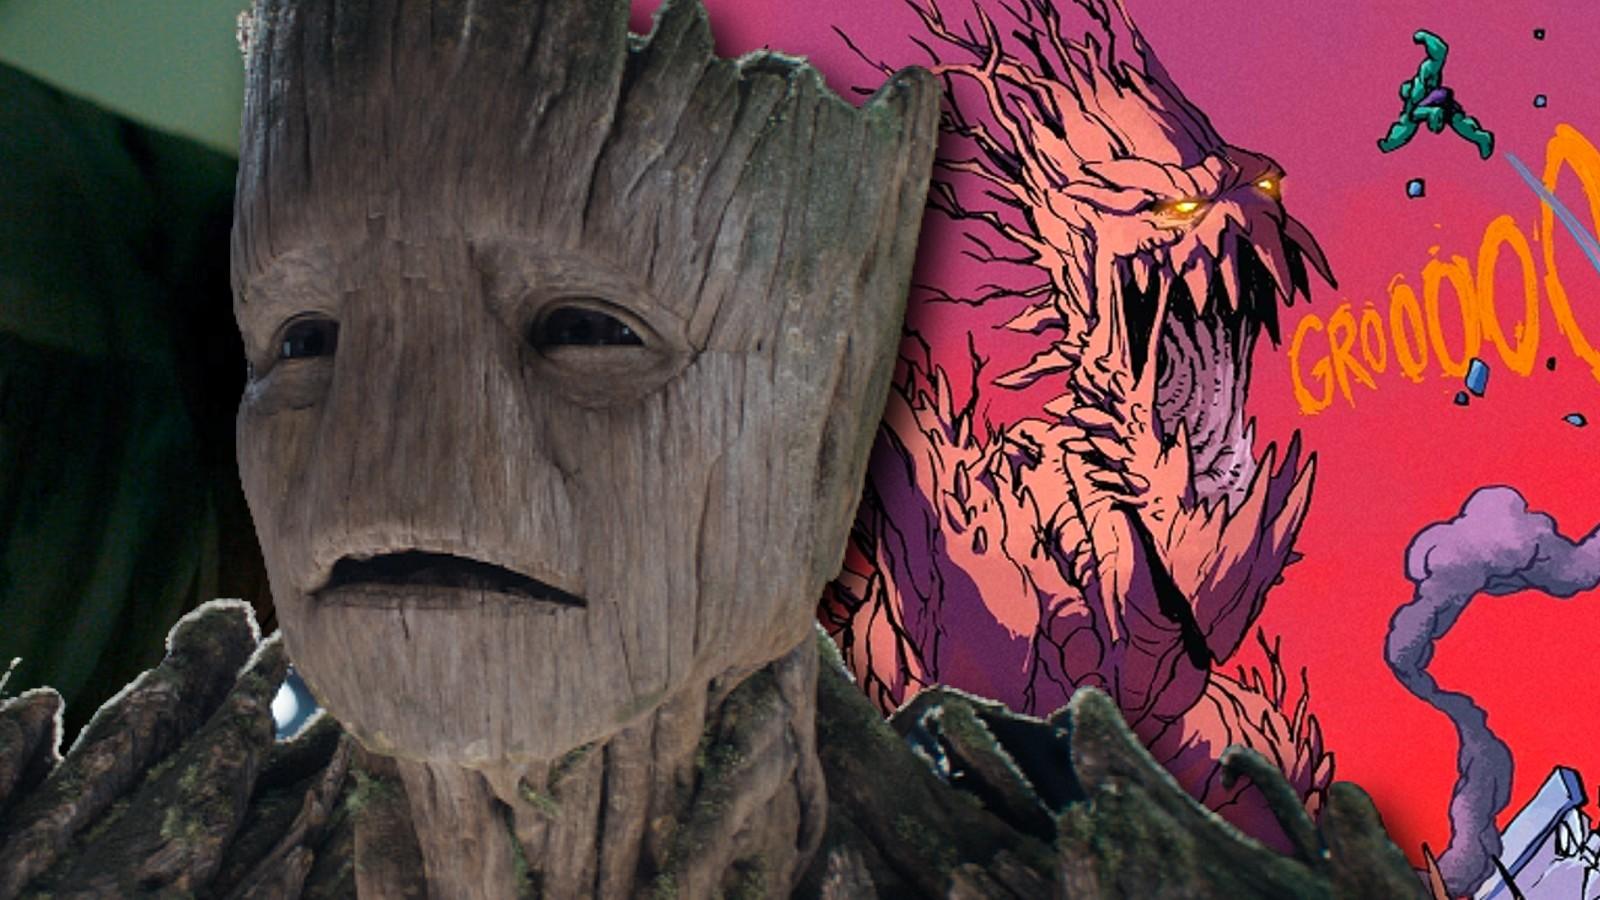 Groot in Guardians of the Galaxy Vol 3 and a still of Kaiju Groot from the comics